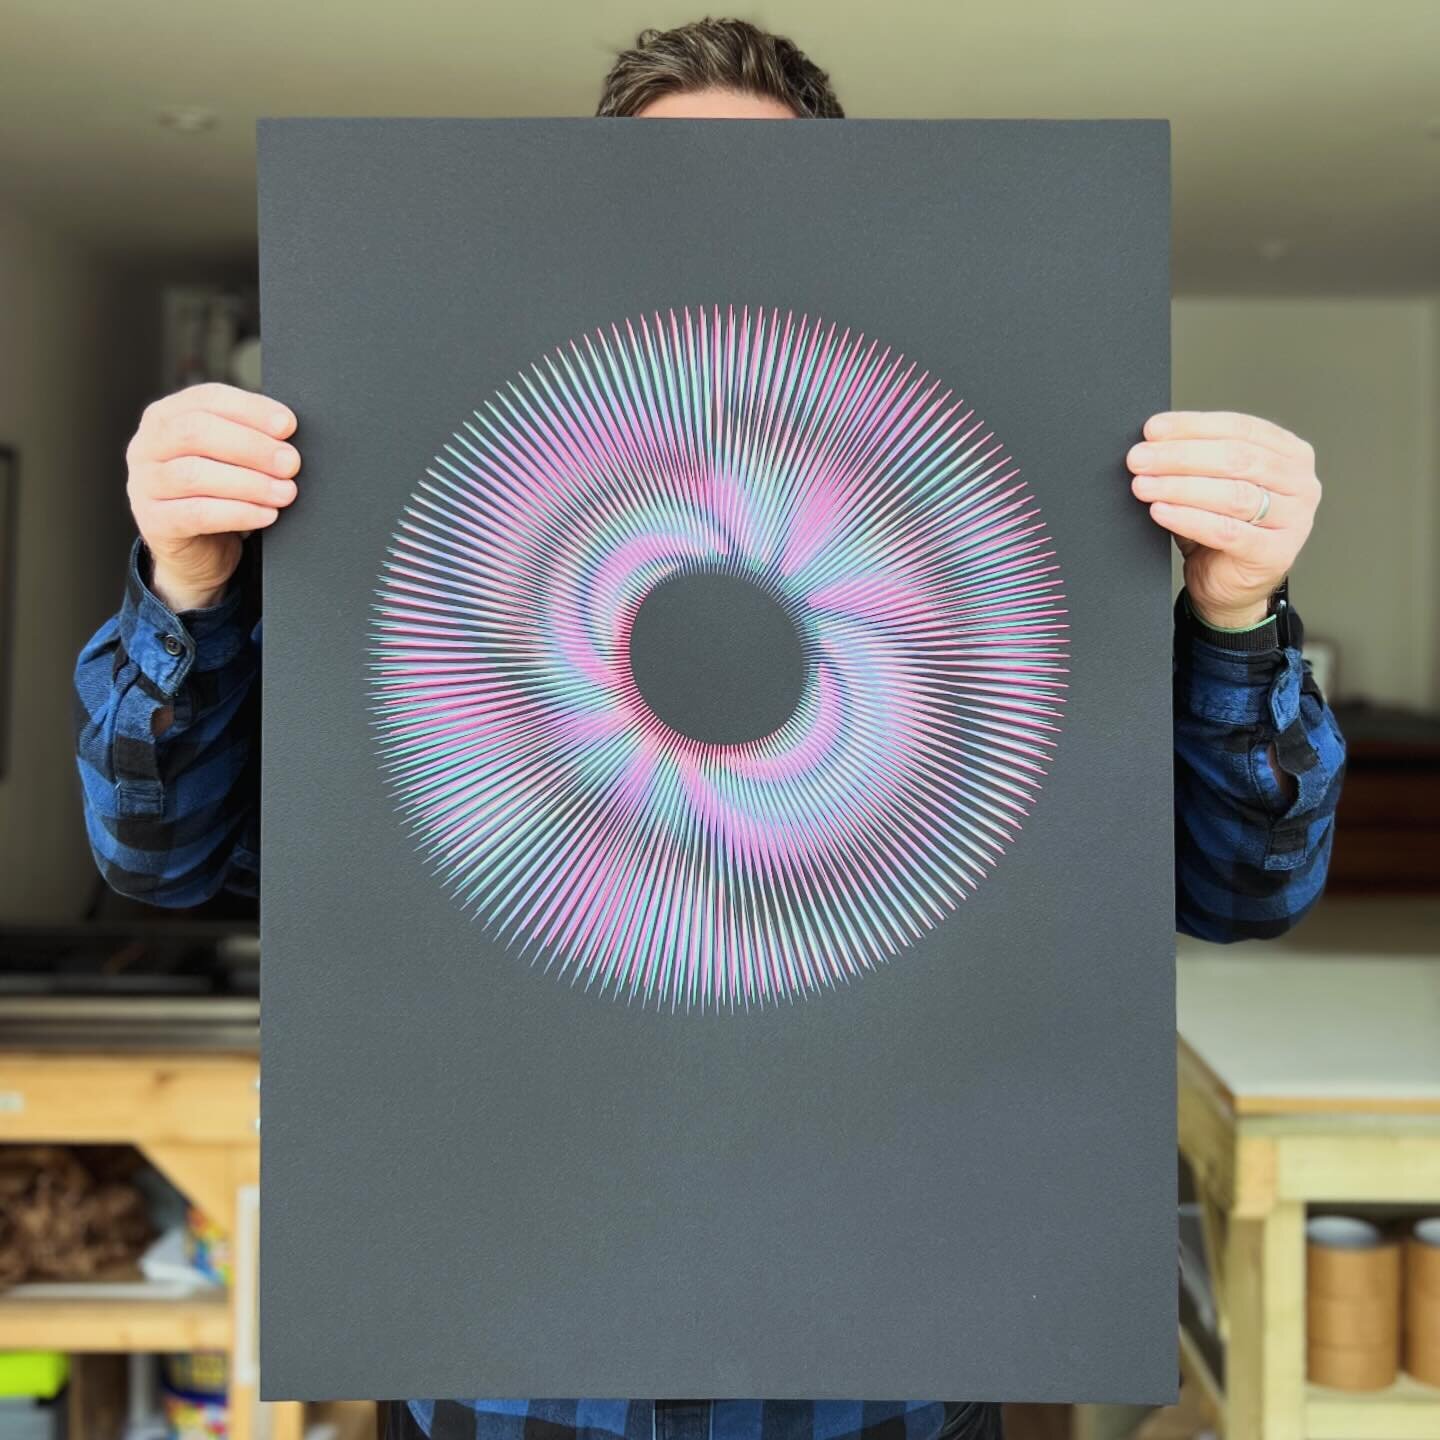 New print available to buy from my website 💥
&ldquo;Woozy&rdquo;
Moir&eacute; pattern effect hand-pulled screenprint
&pound;150 + &pound;5.99 p&amp;p
50 x 70 cm
Very limited edition of 20
3 colour layers
Printed on 250gsm Velin Cuve BK Rives Noir
Nu